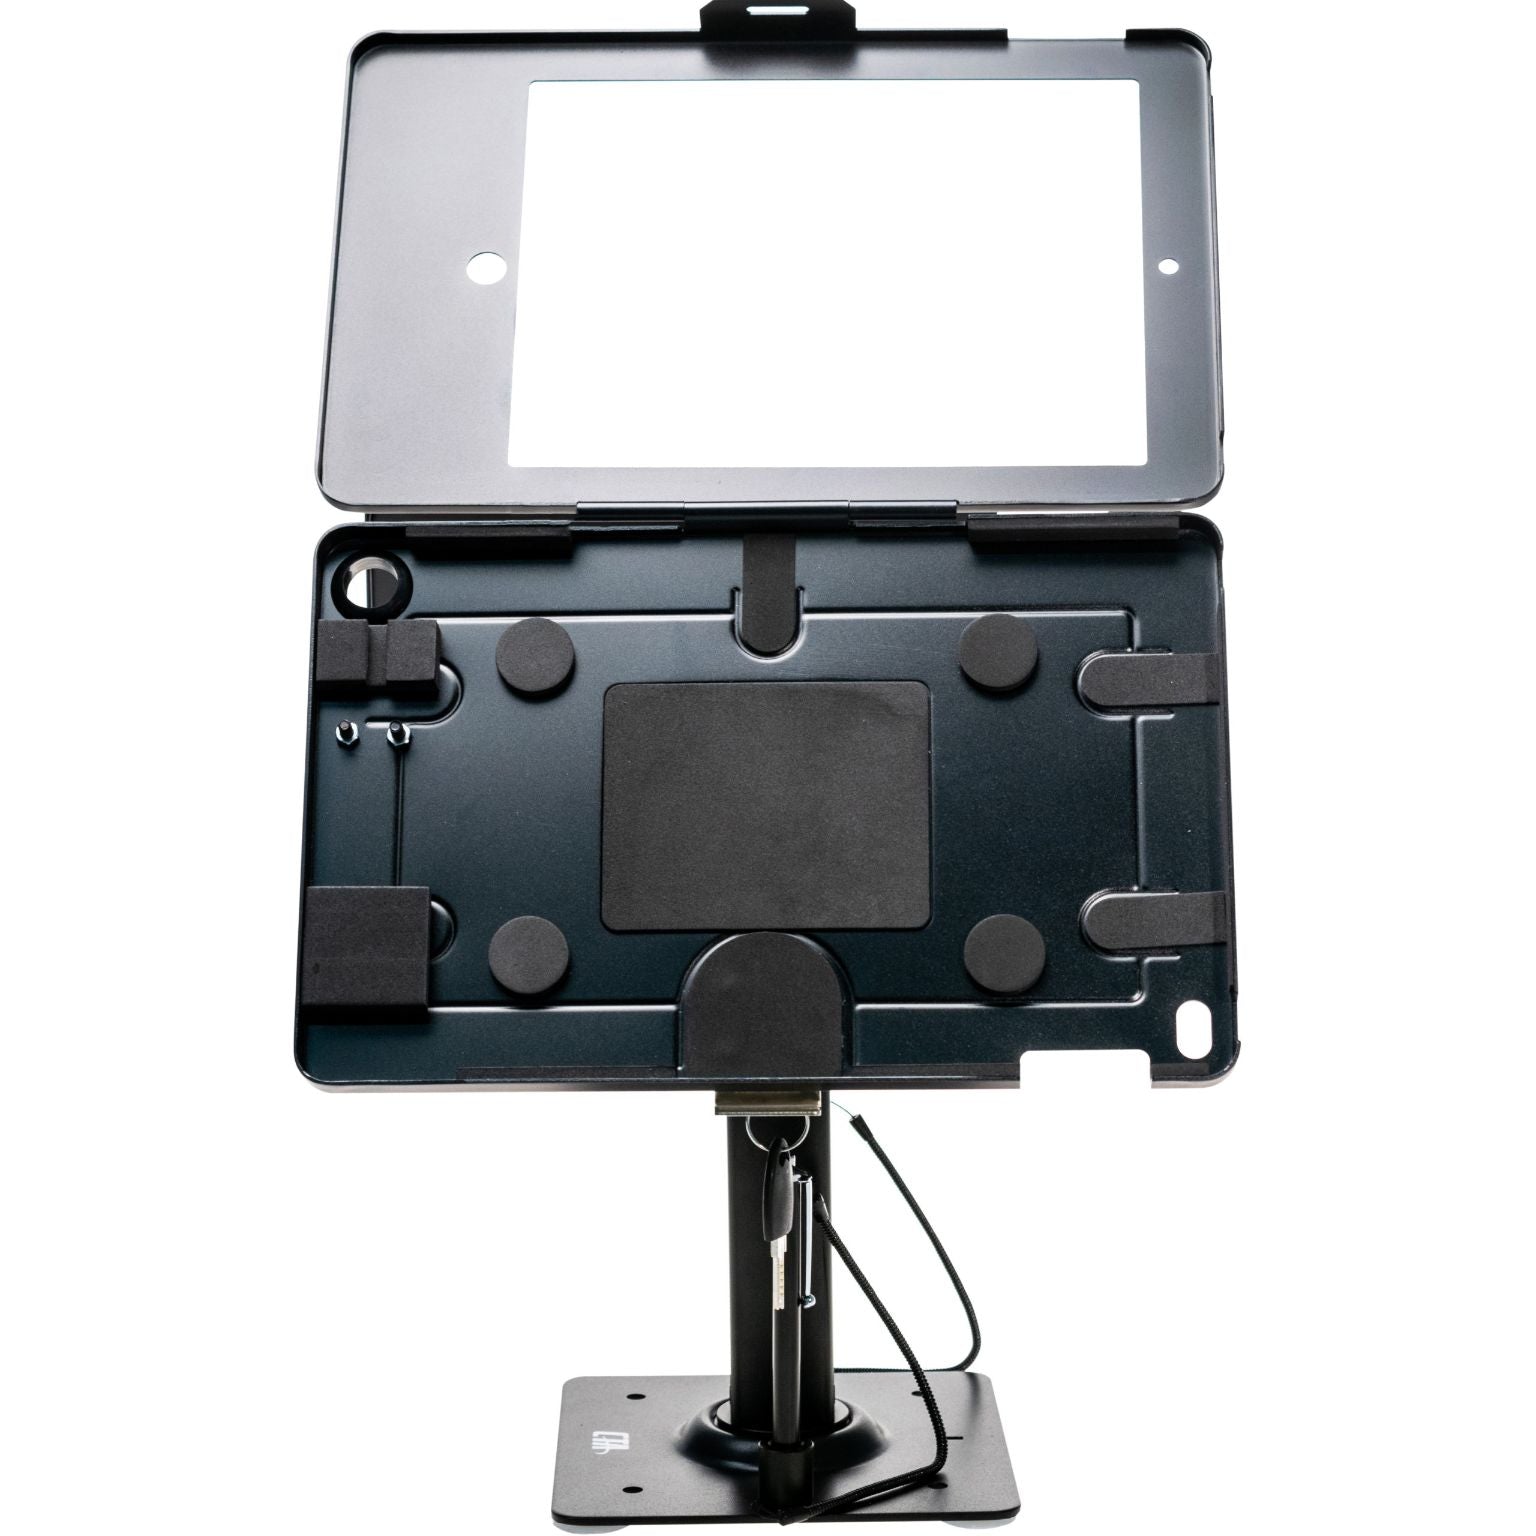 Security Kiosk Dual Stand for iPad Gen. 5 - 6, iPad Pro 9.7, and iPad Air